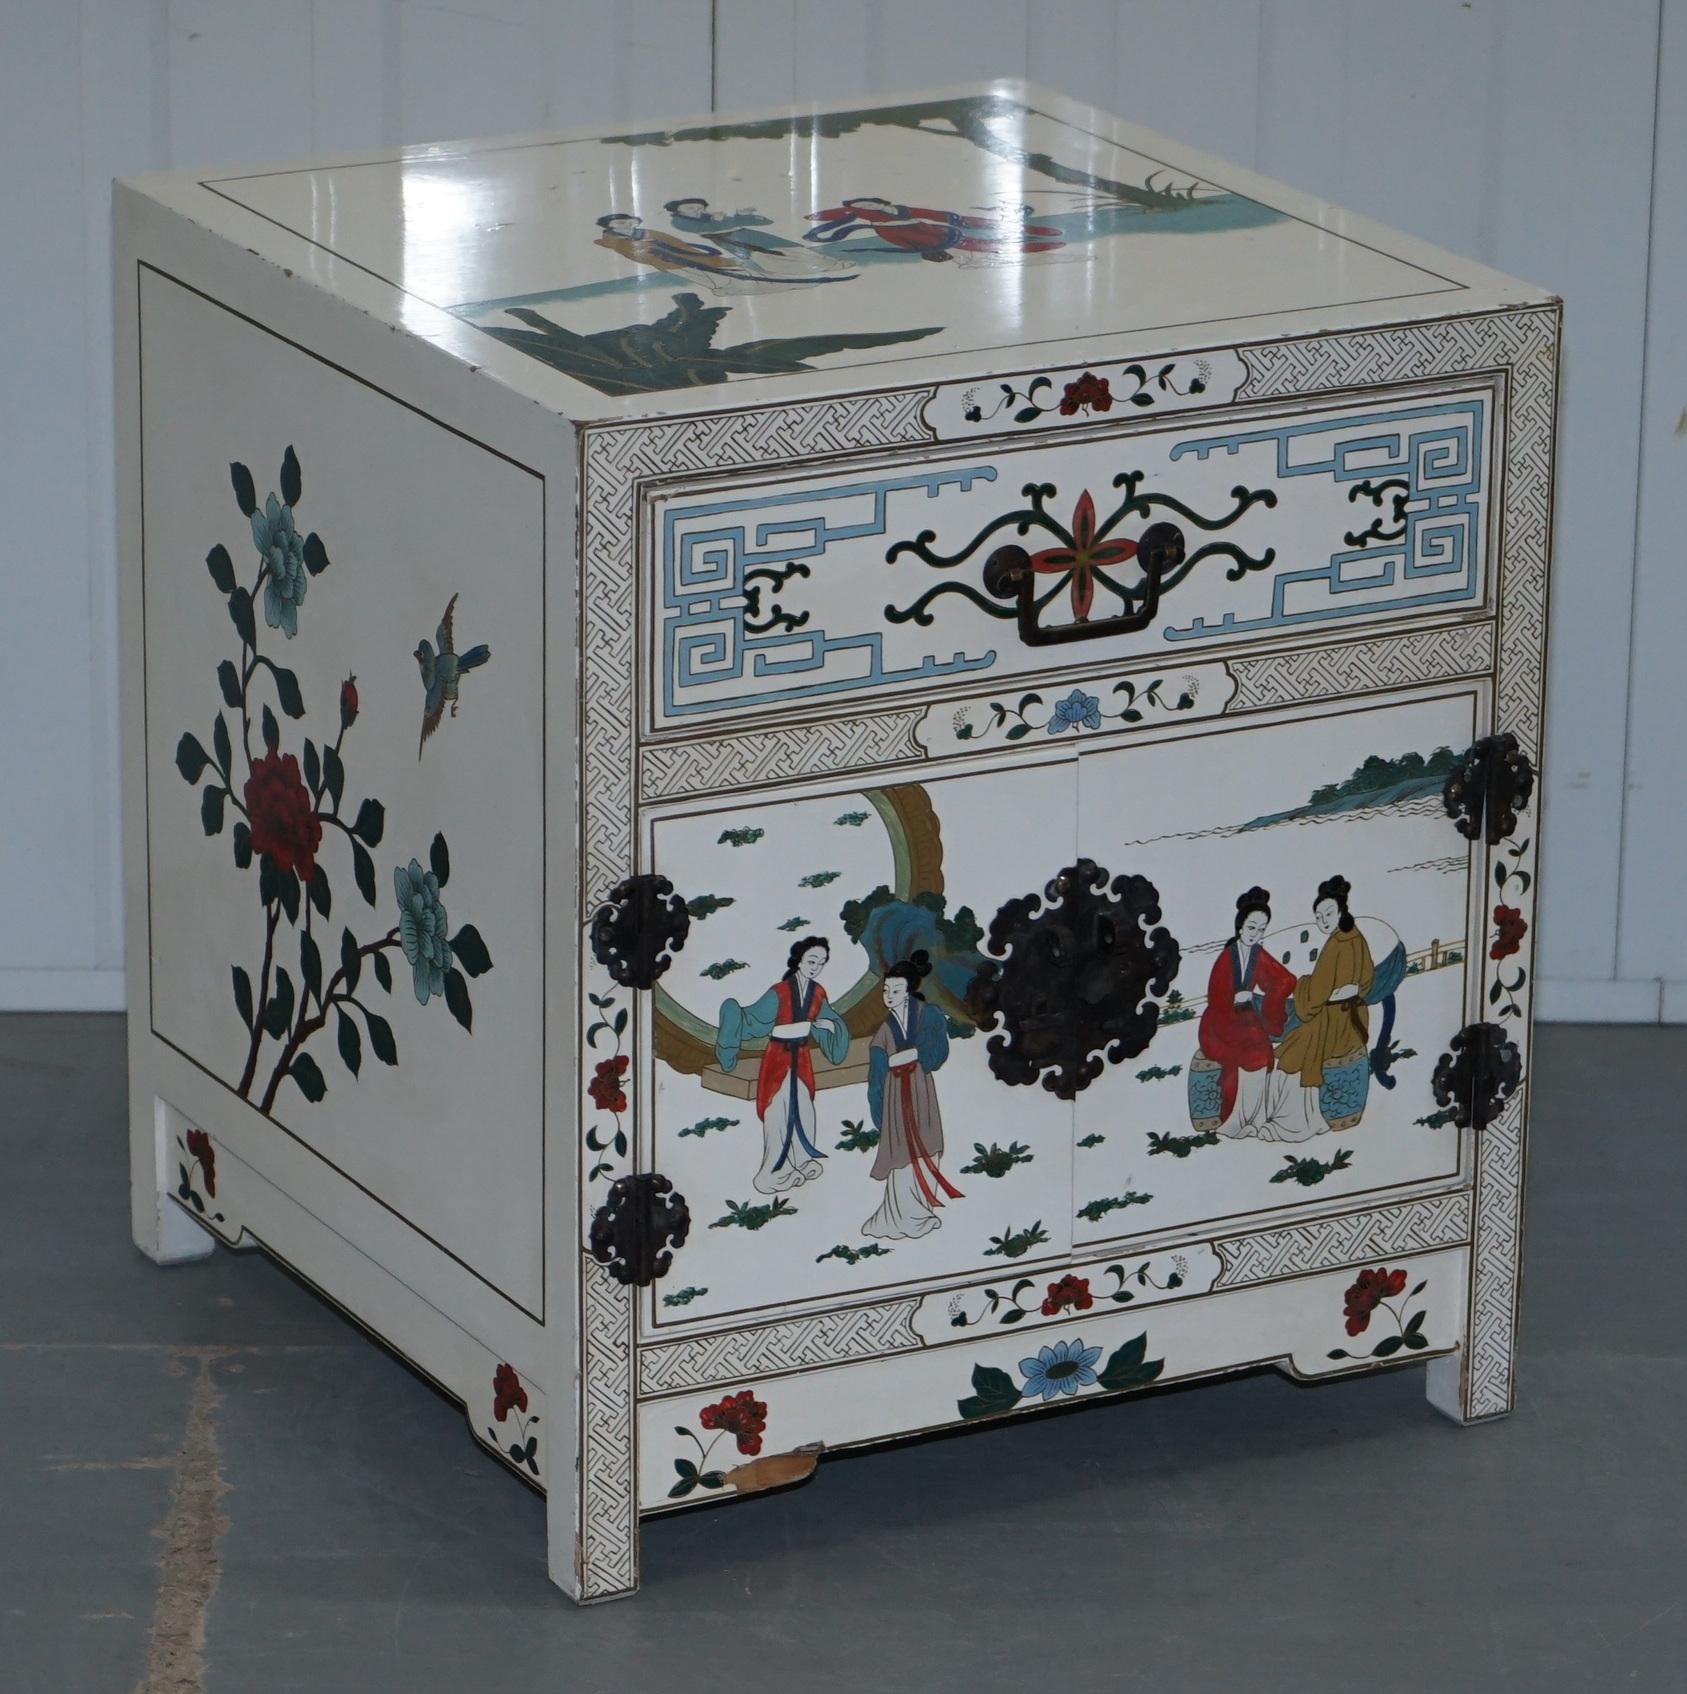 We are delighted to offer for sale this pair of lovely vintage Chinese white lacquered hand painted side chests for the bedroom or living room

A very ornately decorated pair in the Chinese style, they are vintage and have chips to the timber and